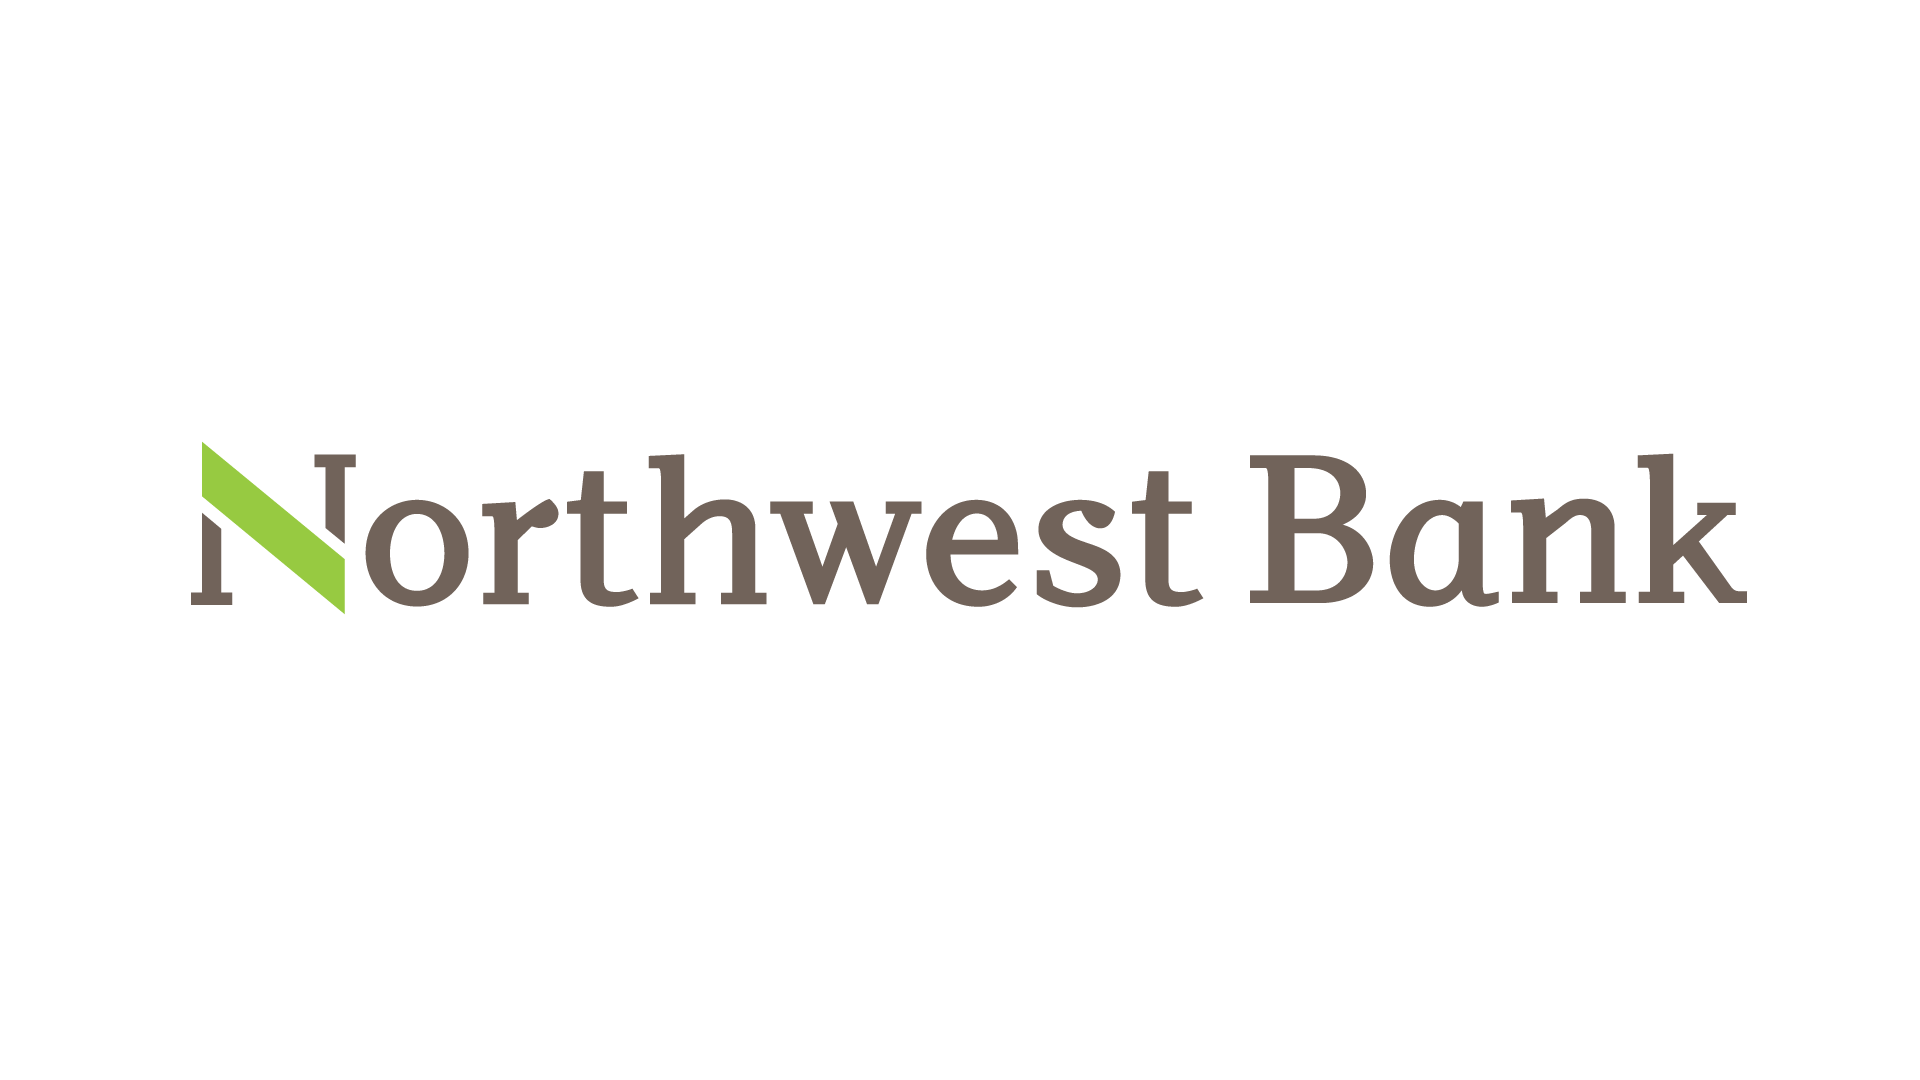 The northwest bank logo is green and brown on a white background.